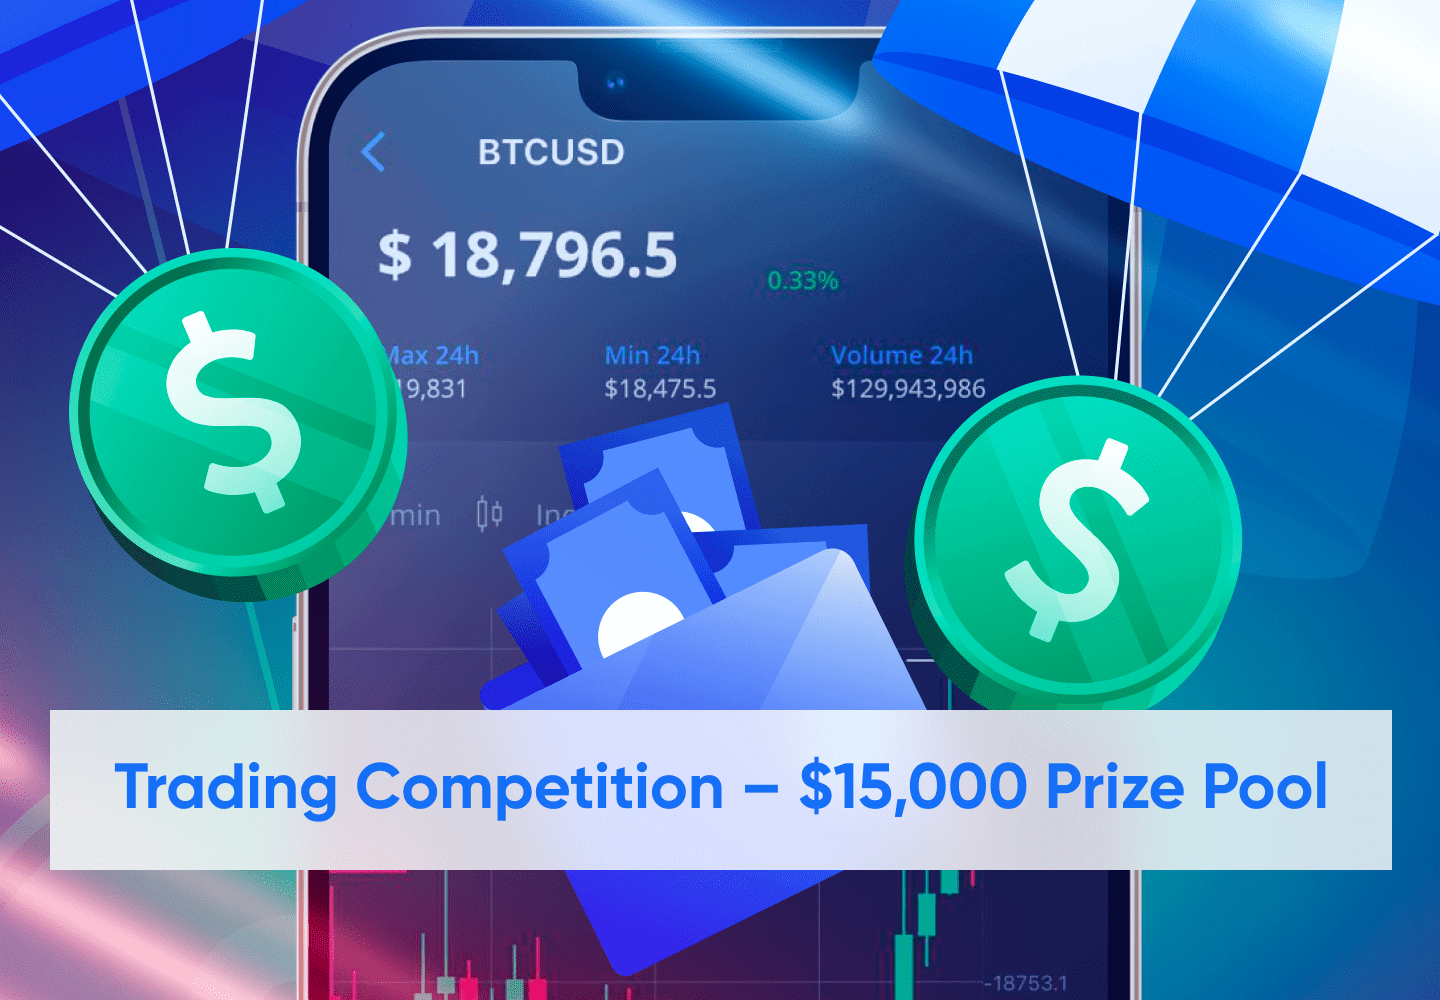 [ENDED] Risk-Free Trading Competition – $15,000 Prize pool. Flex your trading skills